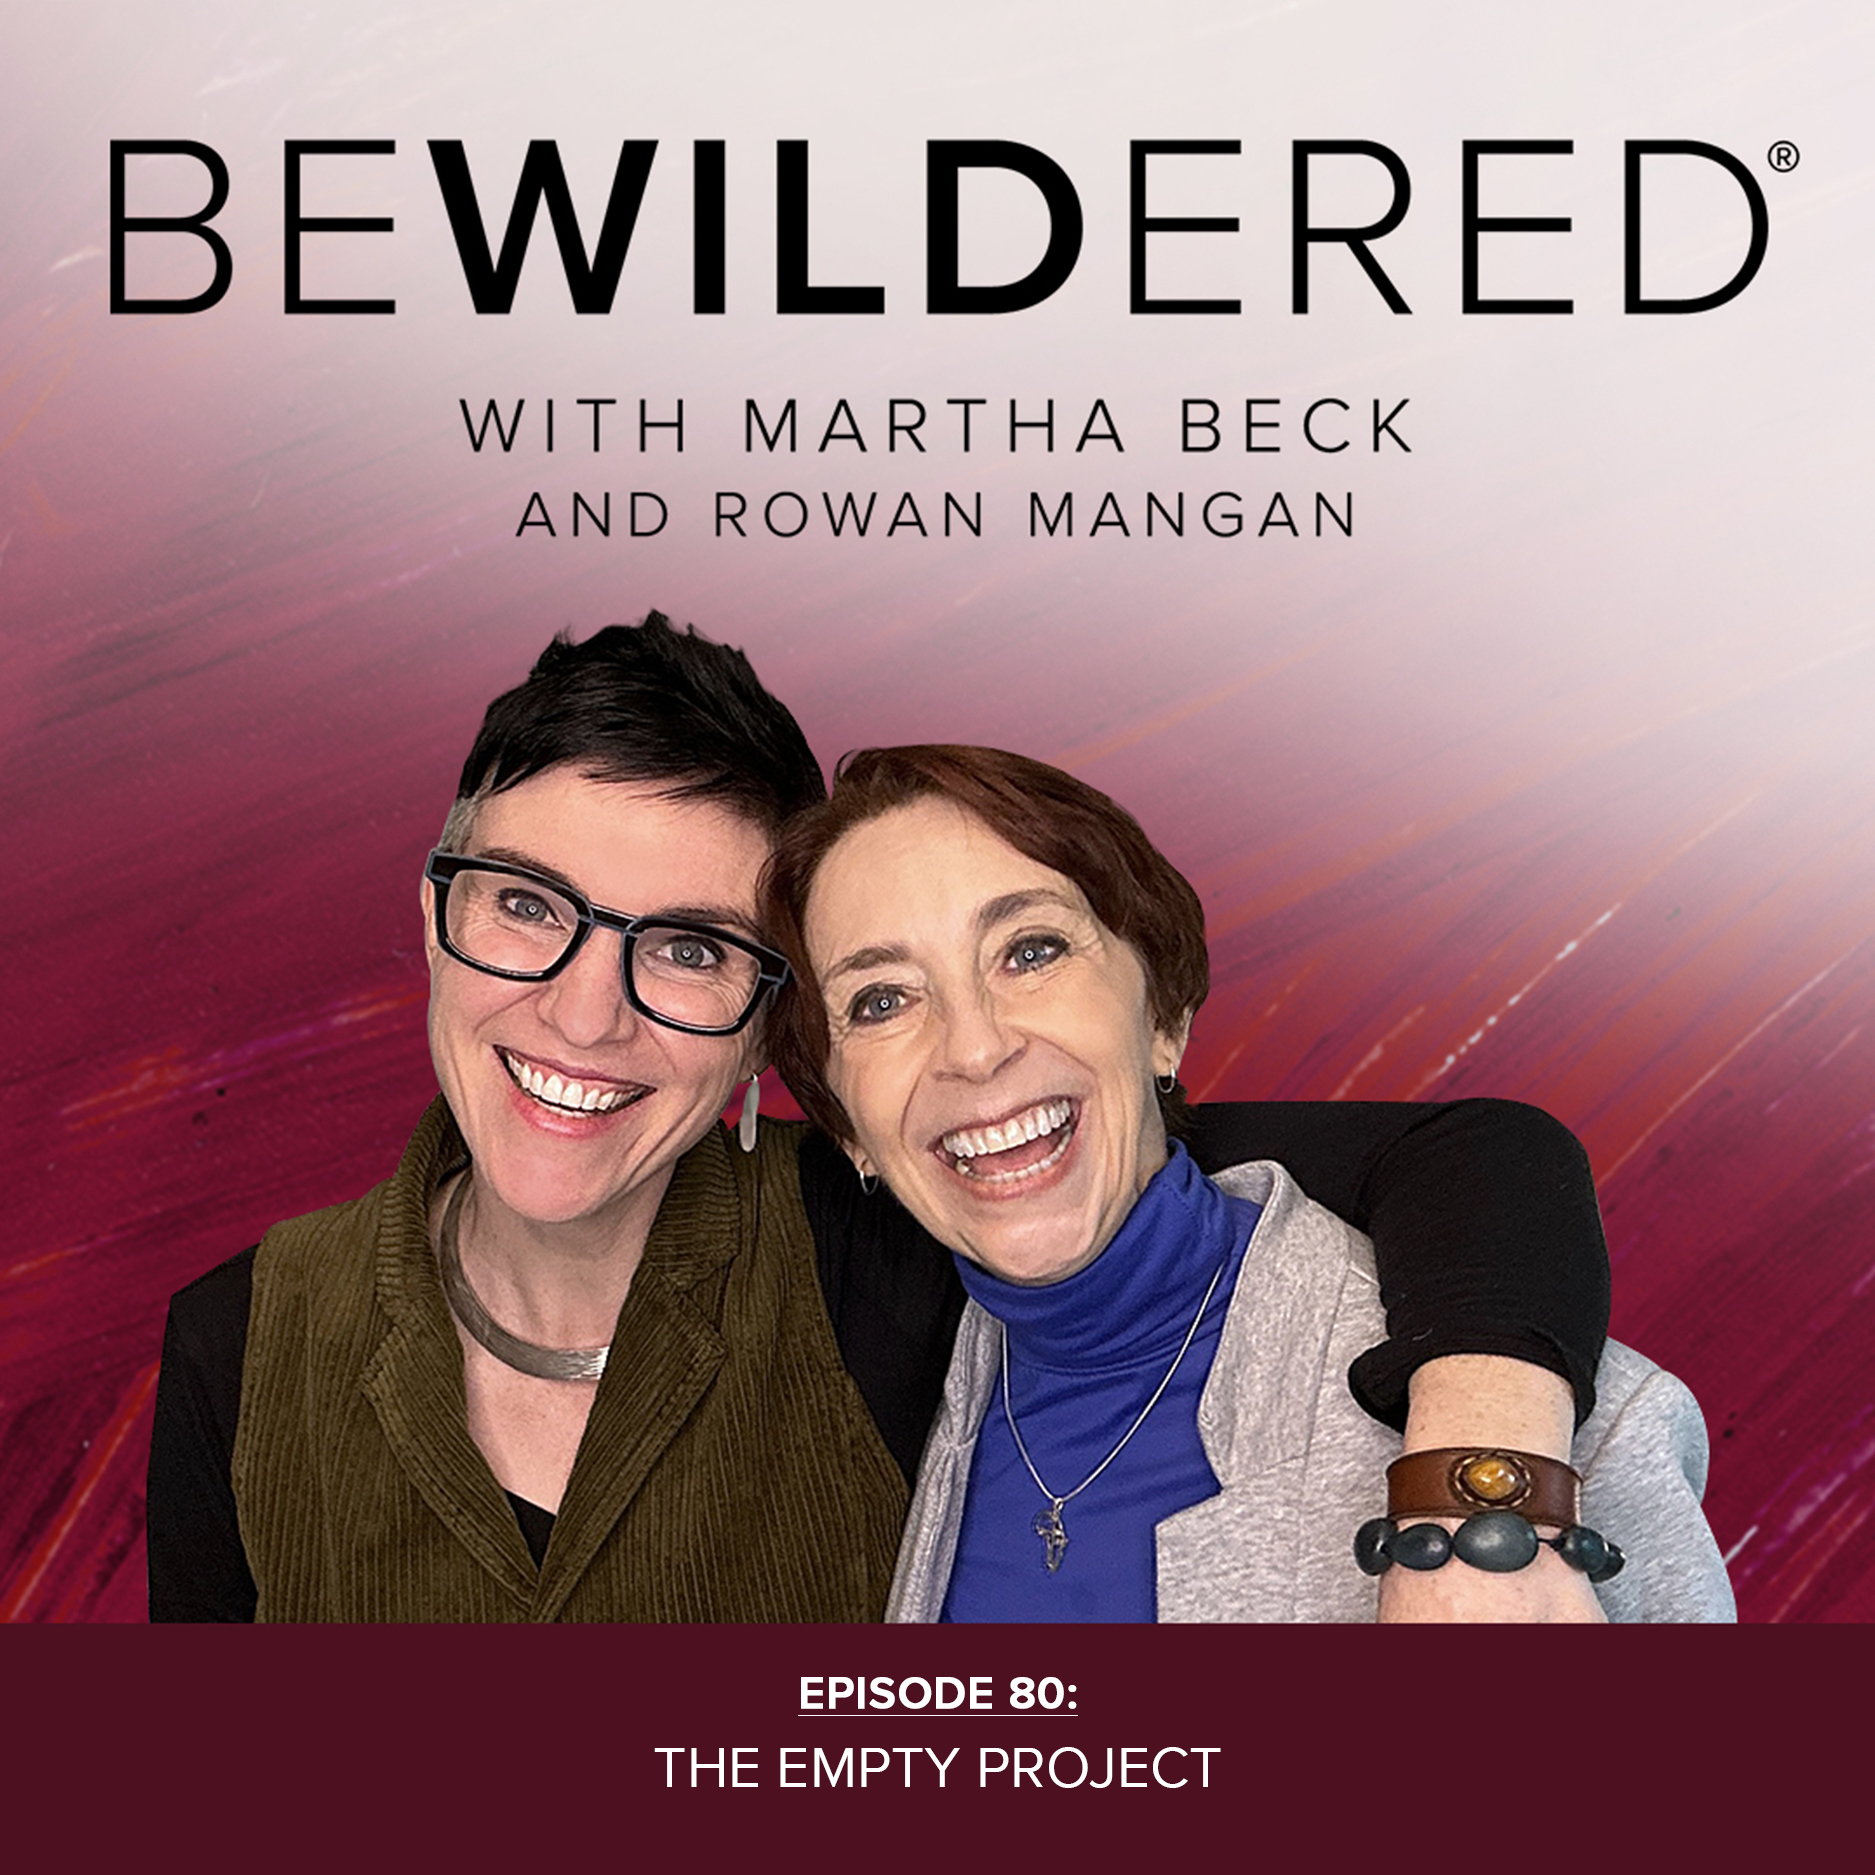 Image for Episode #80 The Empty Project for the Bewildered Podcast with Martha Beck and Rowan Mangan